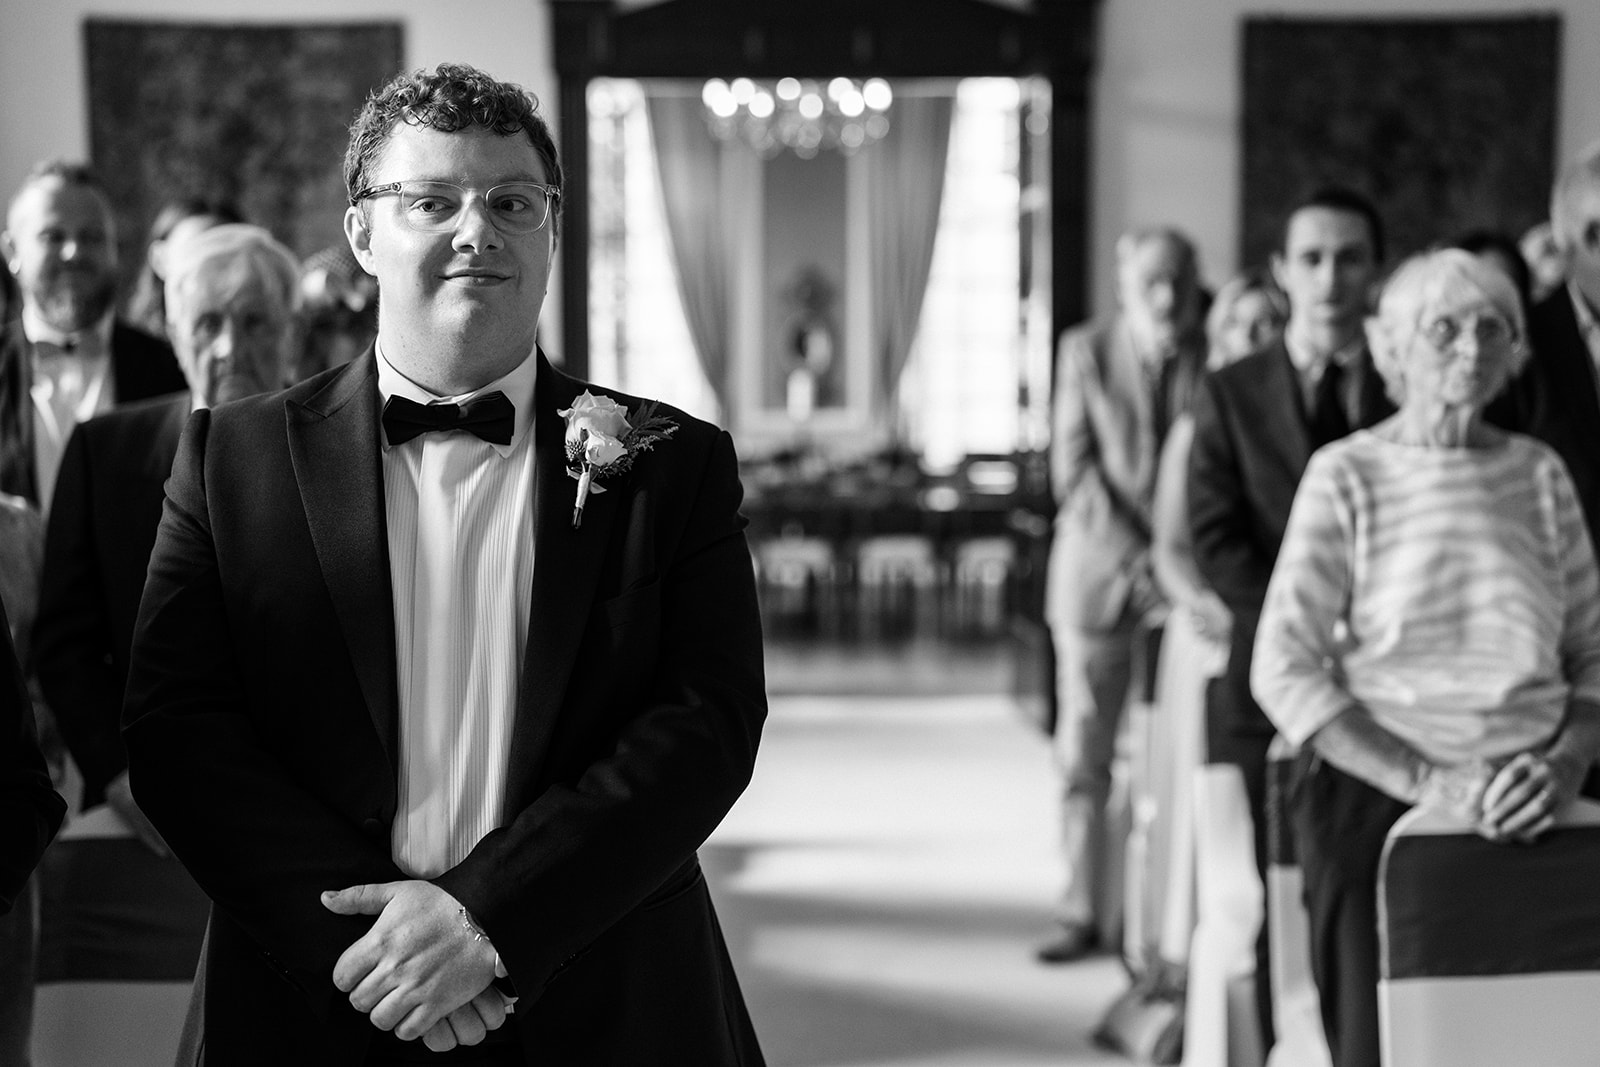 Hemswell Court Wedding Photography - groom waits patiently for the start of the wedding ceremony